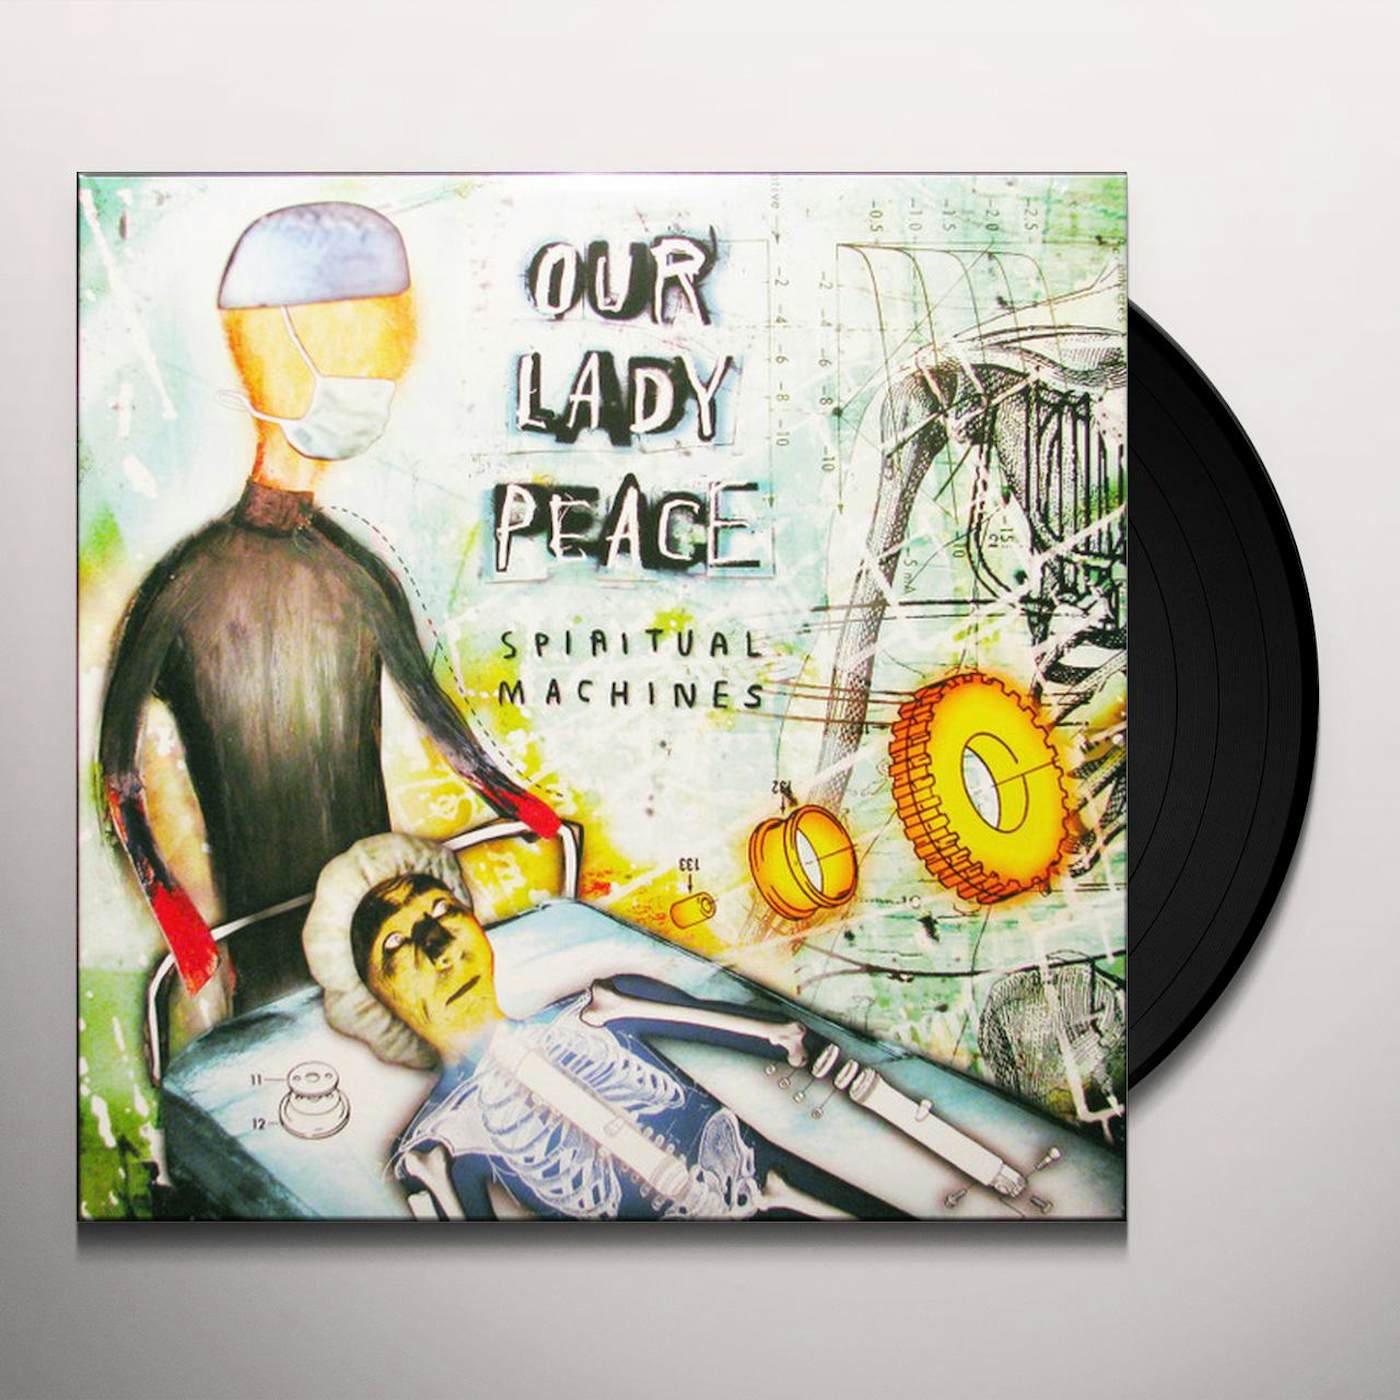 Our Lady Peace SPIRITUAL MACHINES Vinyl Record